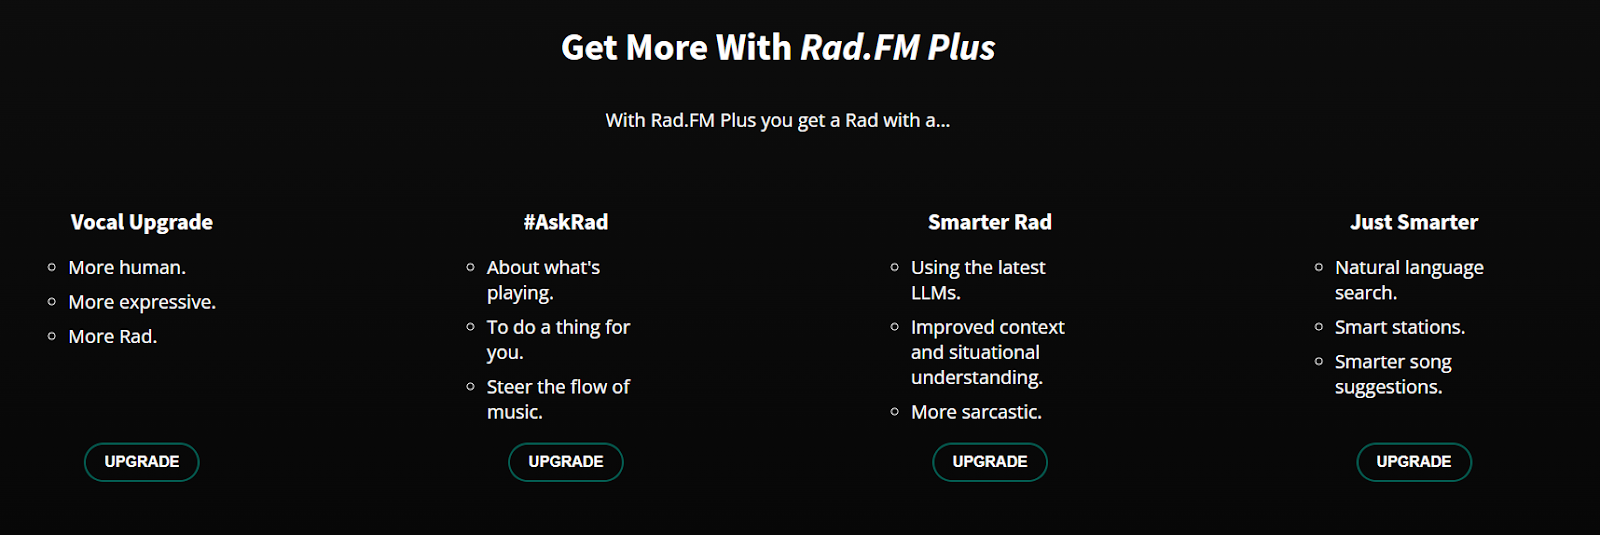 Radiant landing page screenshot with an announcement of Rad.FM Plus subscription that will include more features, better AI recommendations, and a better voice for the DJ